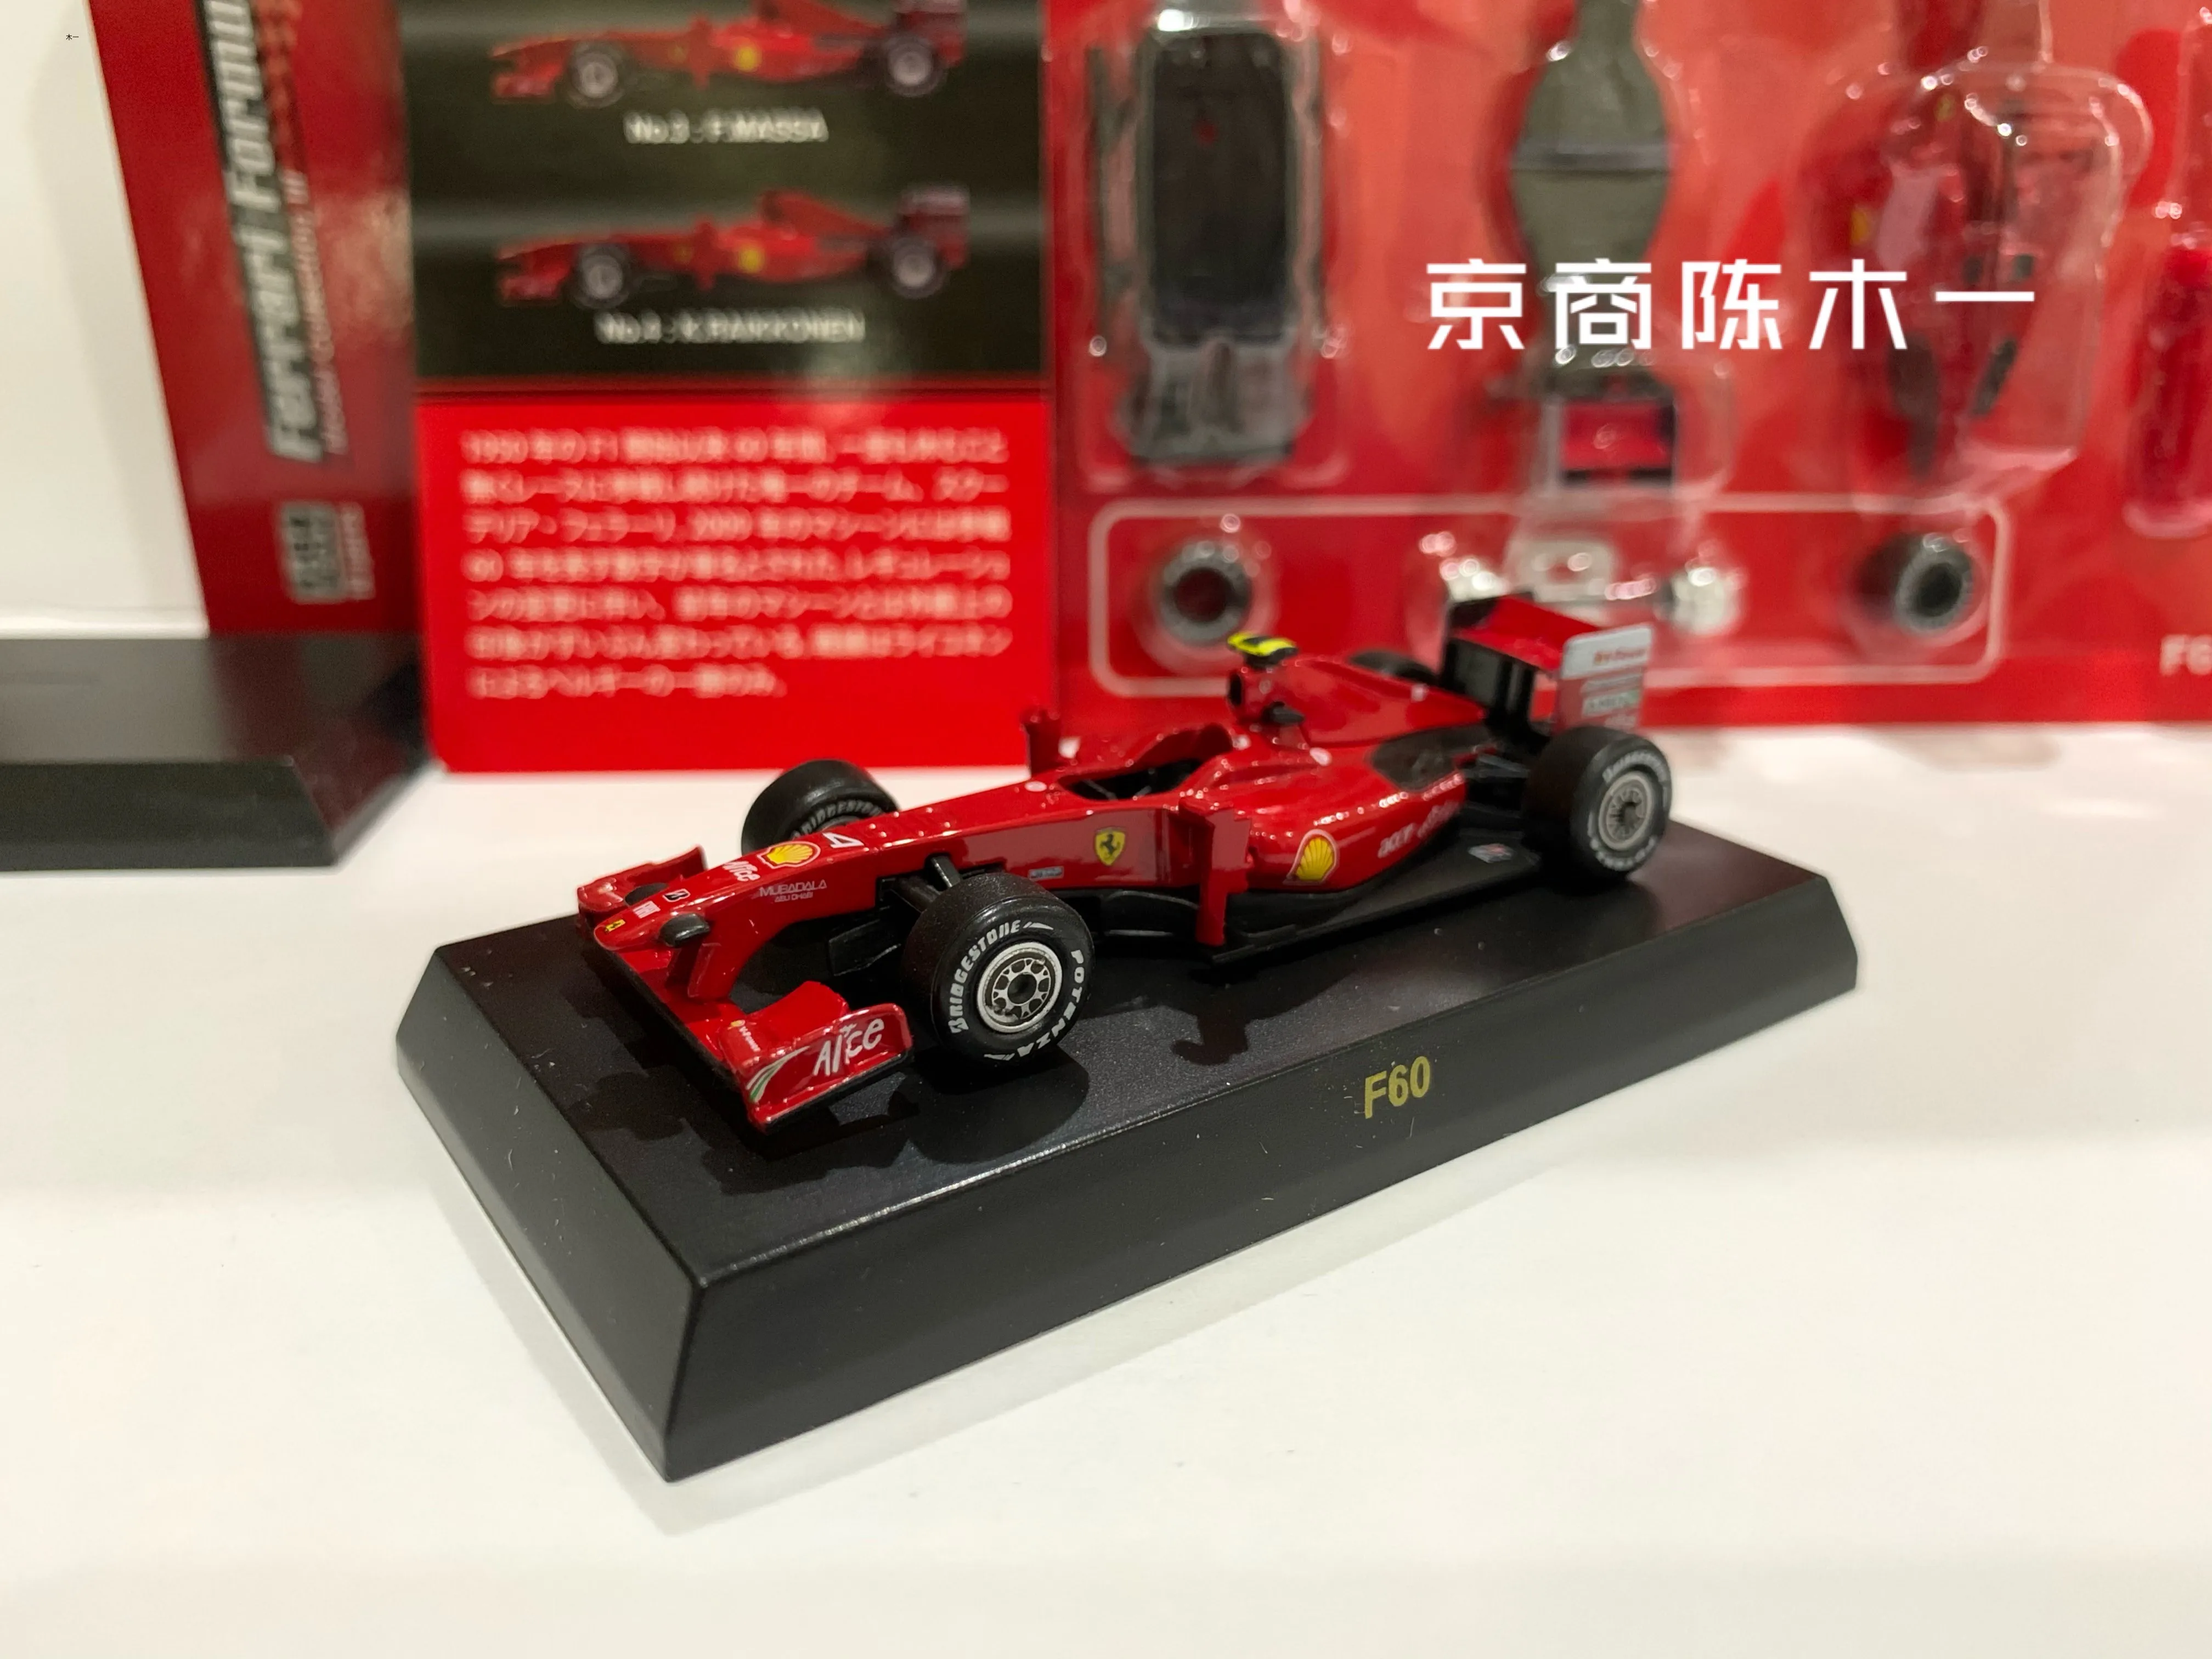 

1/64 KYOSHO F60 KIMI 2009 #4 F1 Collection of die-cast alloy assembled car decoration model toys